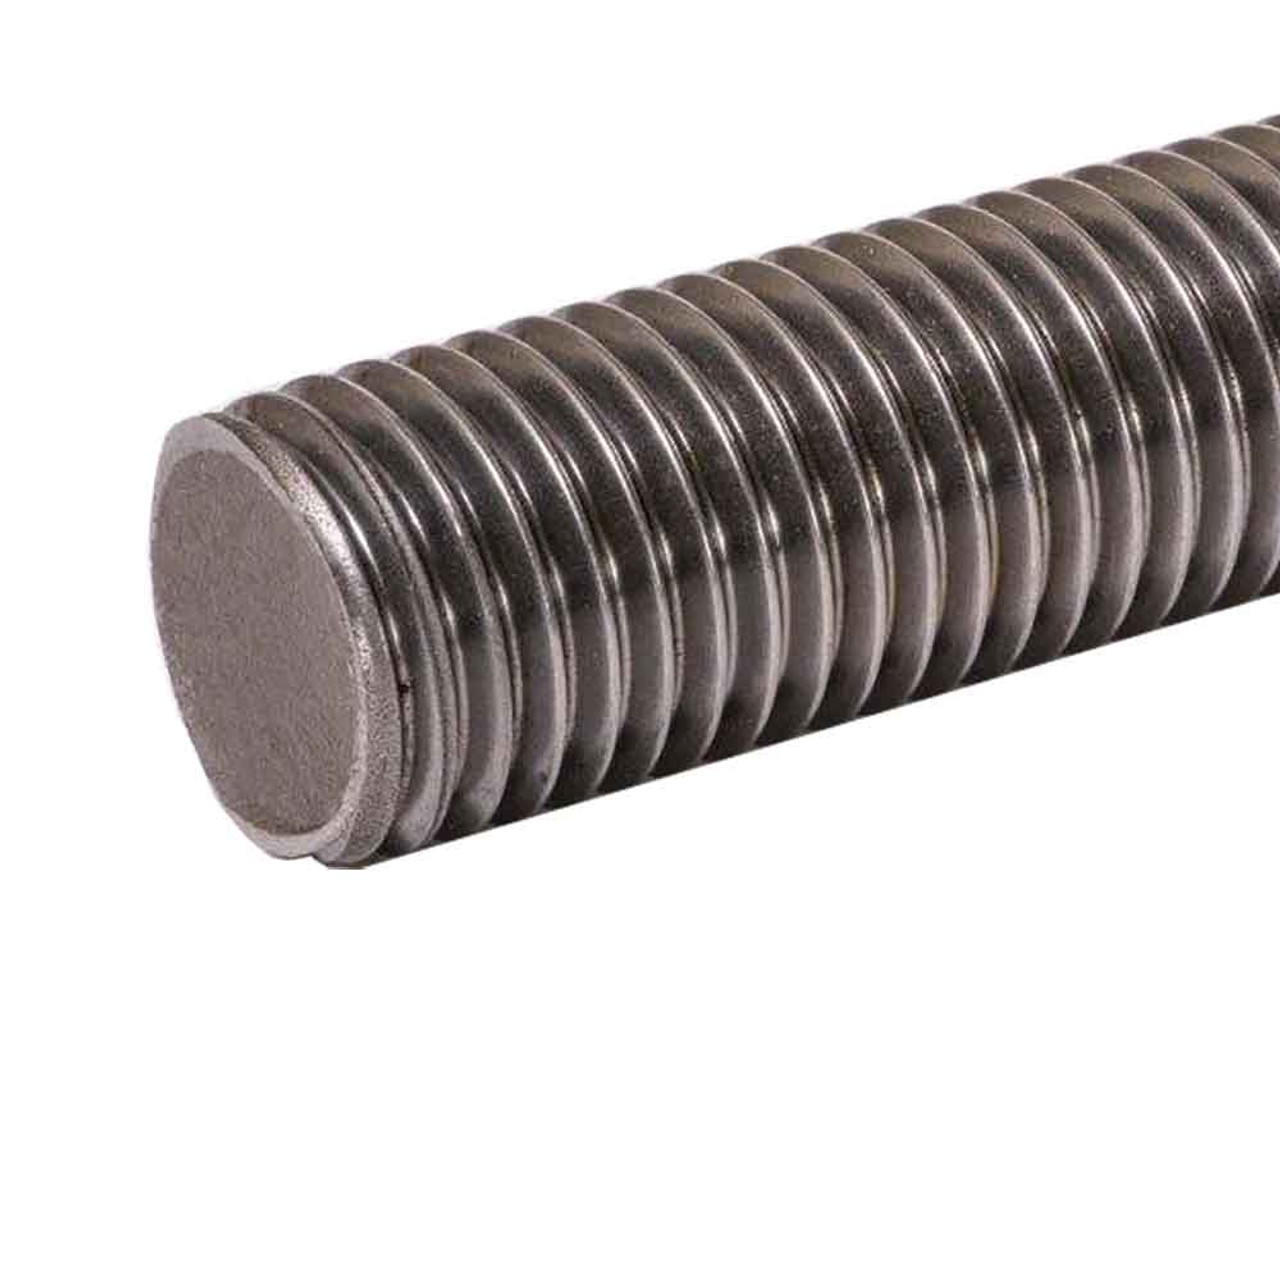 5/8 - 11 TPI x 36 inches, Low Carbon Steel Threaded Rod, Zinc Coated